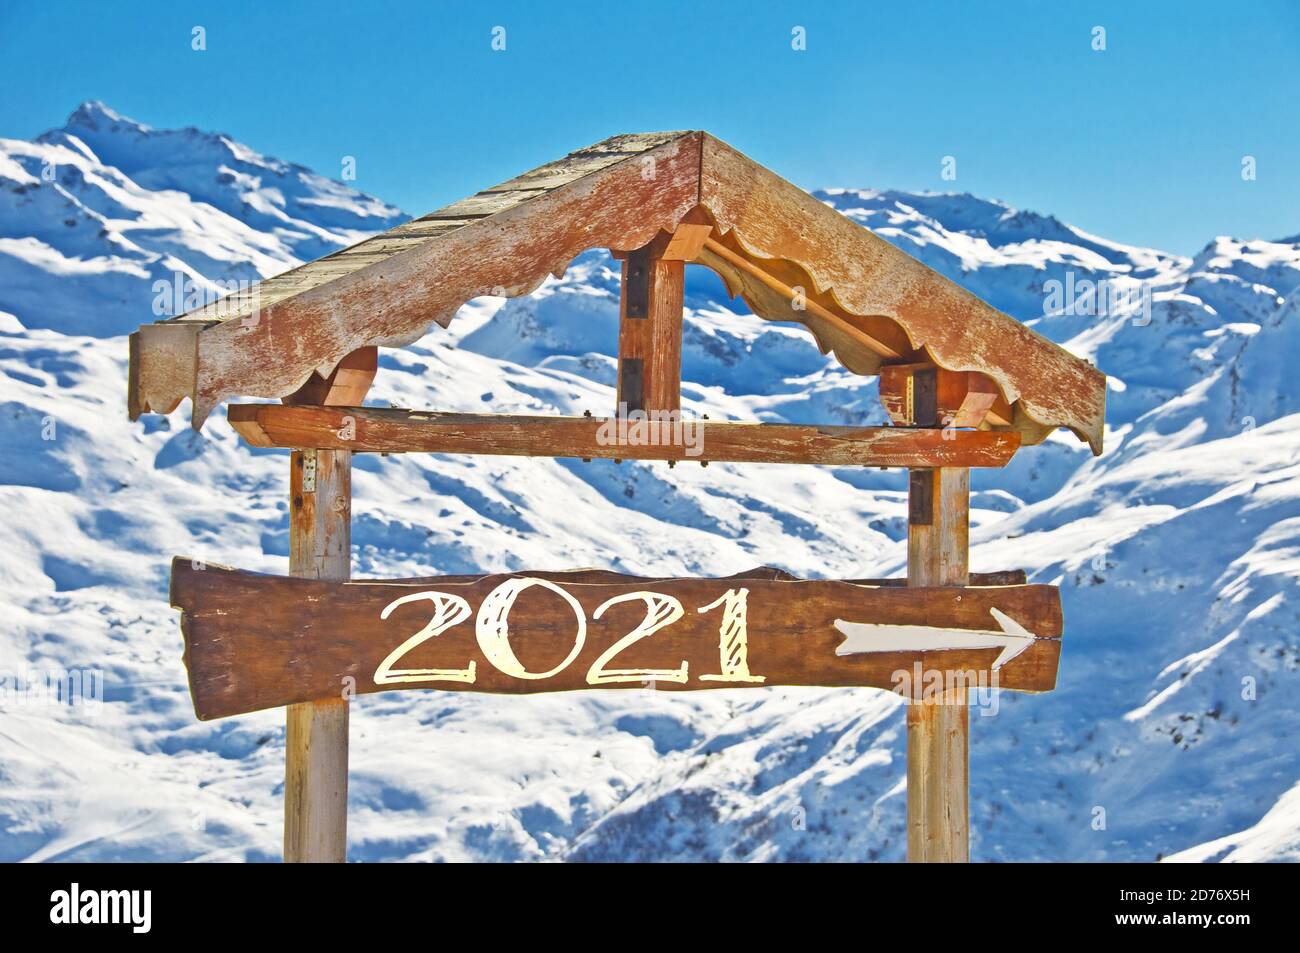 2021 written on a wooden direction sign, blue sky and winter snowy tree landscape background happy holiday seasons new year greetings Stock Photo